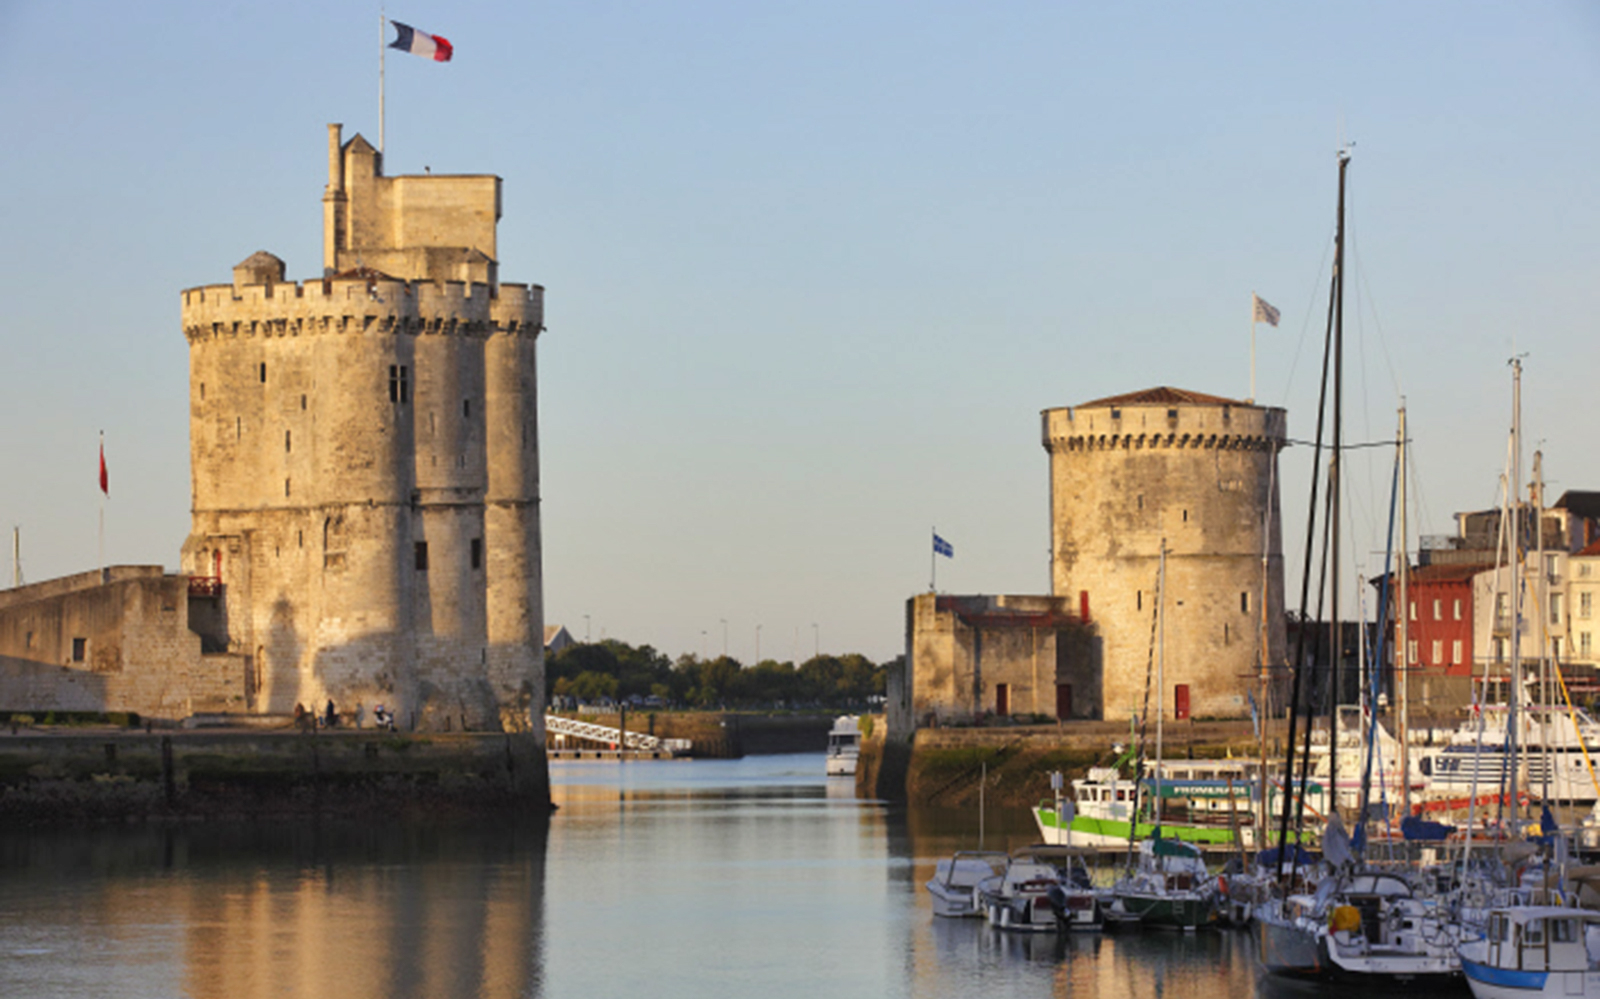 Image of Skip the Line: Towers of La Rochelle Ticket